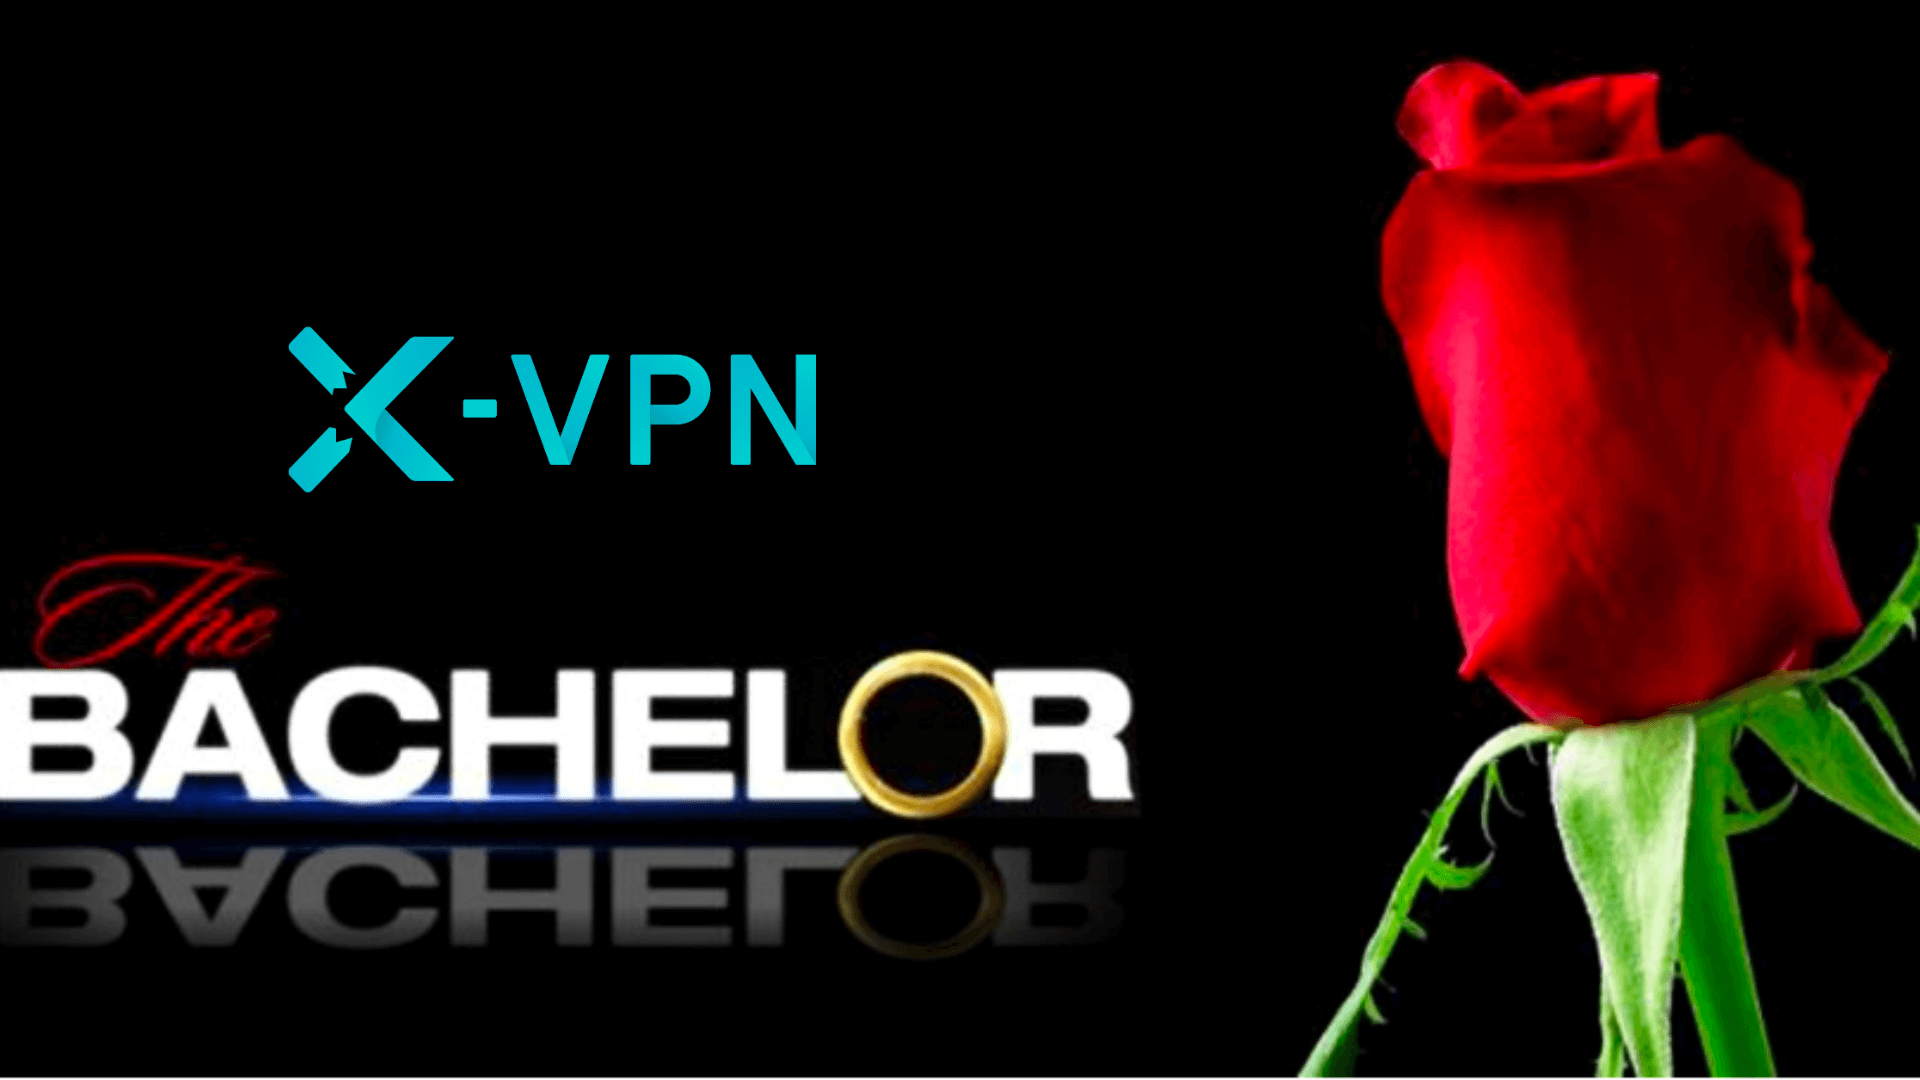 How to watch The Bachelor online with X-VPN?